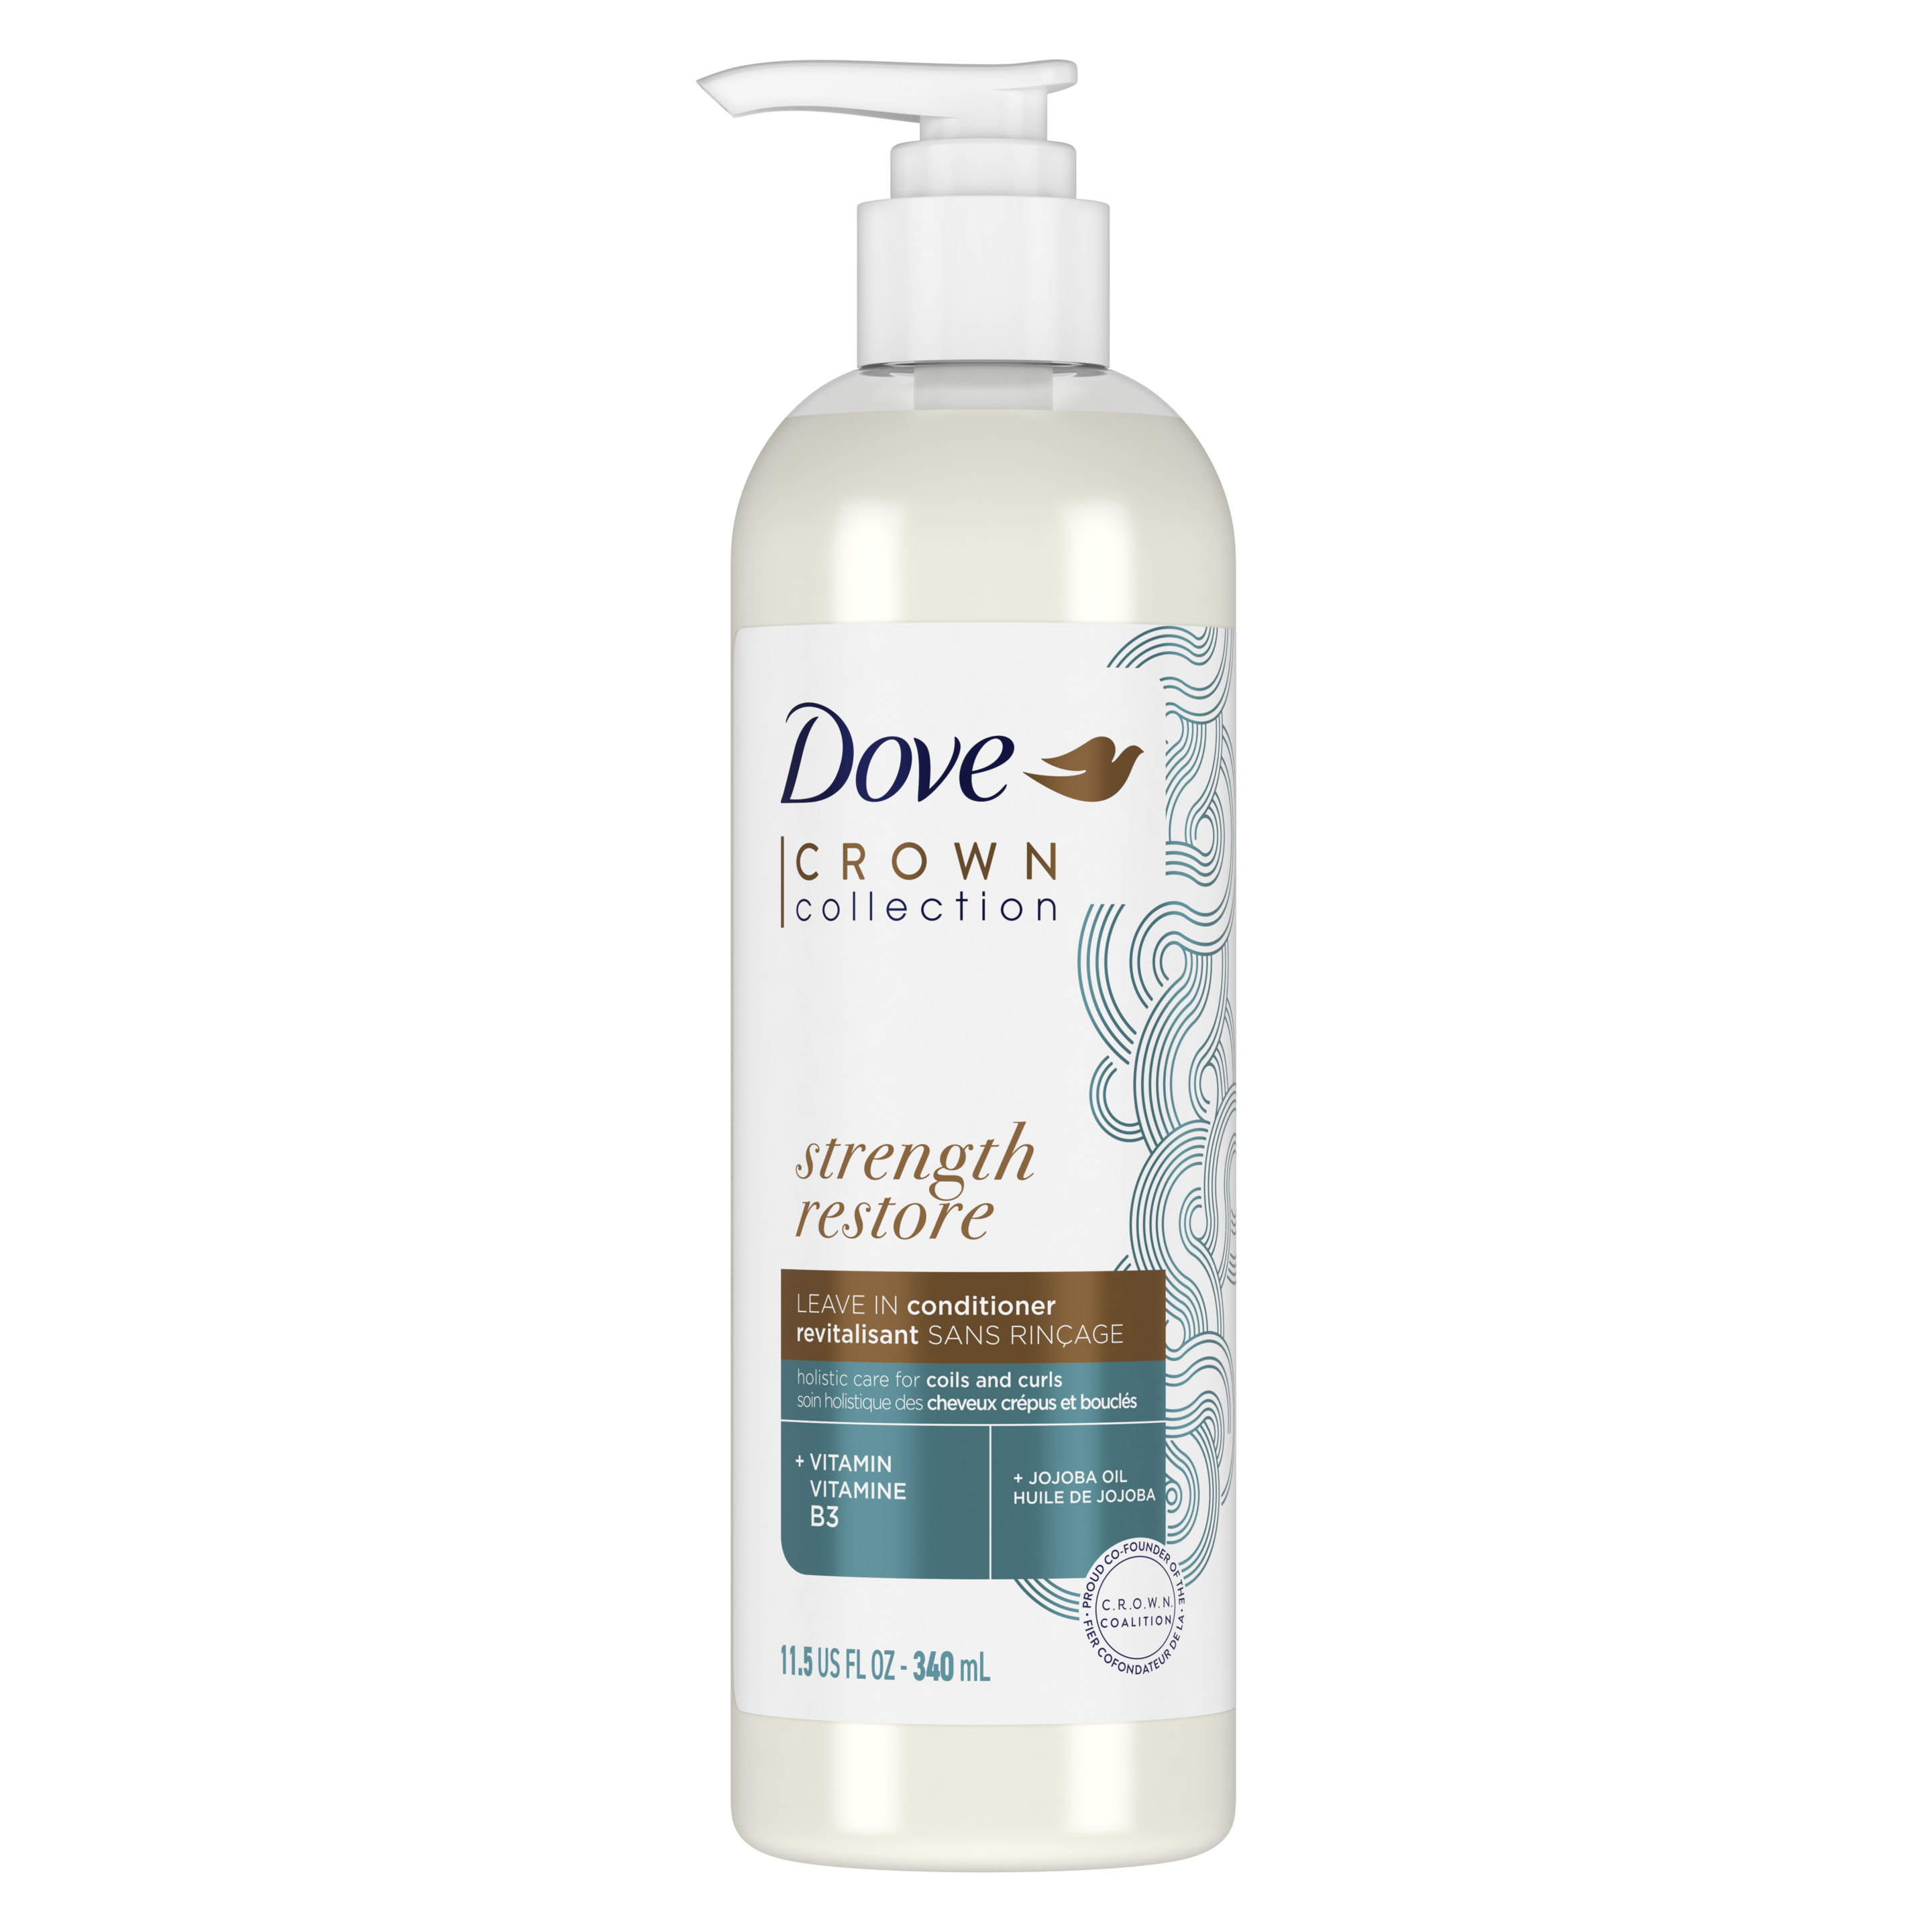 Dove Crown Collection Strength Restore Leave-In Conditioner